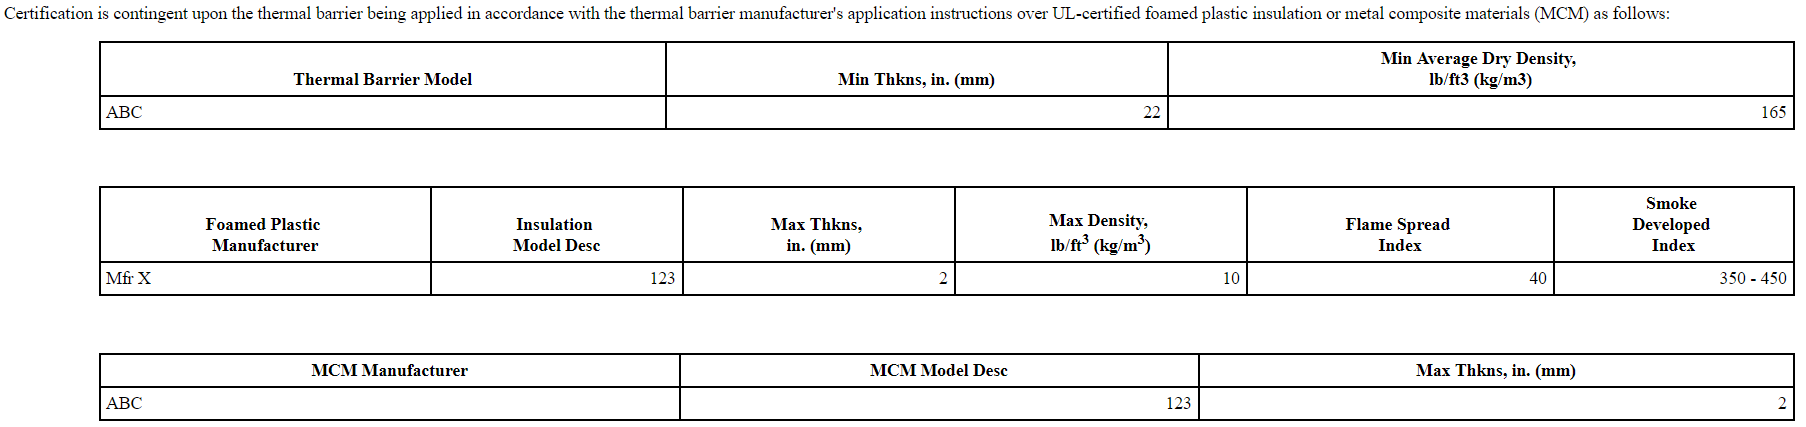 Certification Requirements Chart